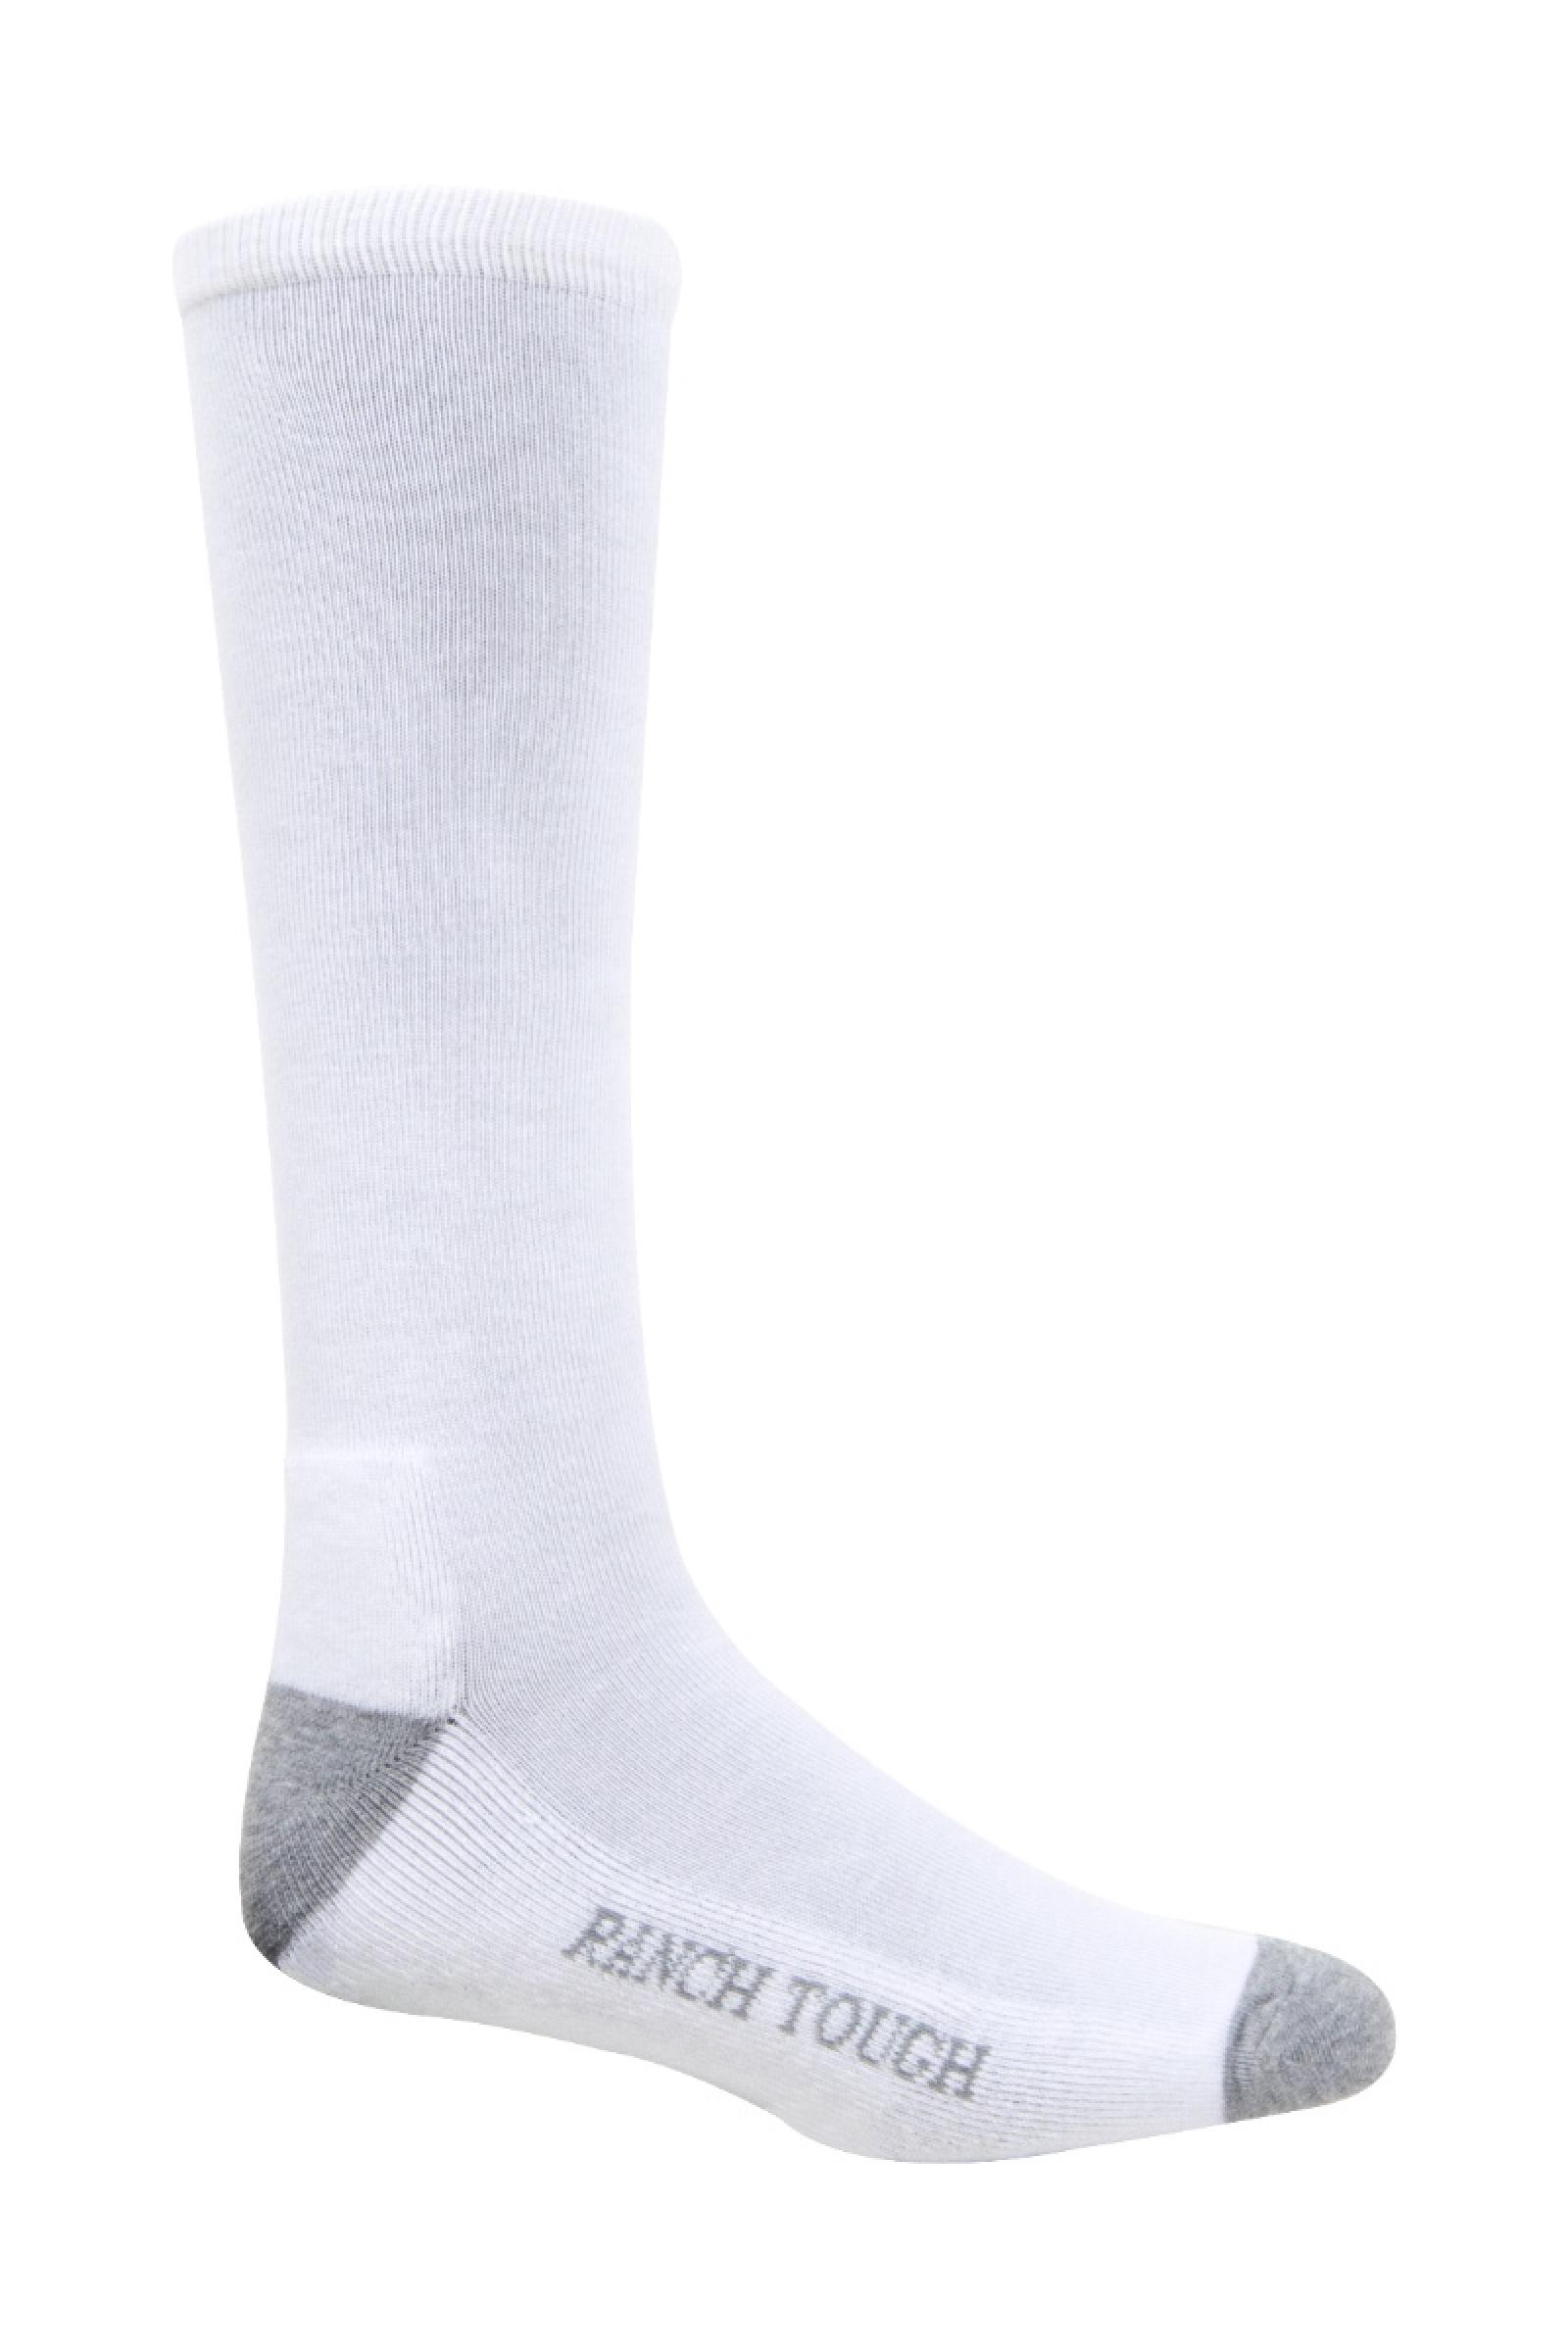 Noble Outfitters Ranch Tough® Tall Socks - 6 Pack